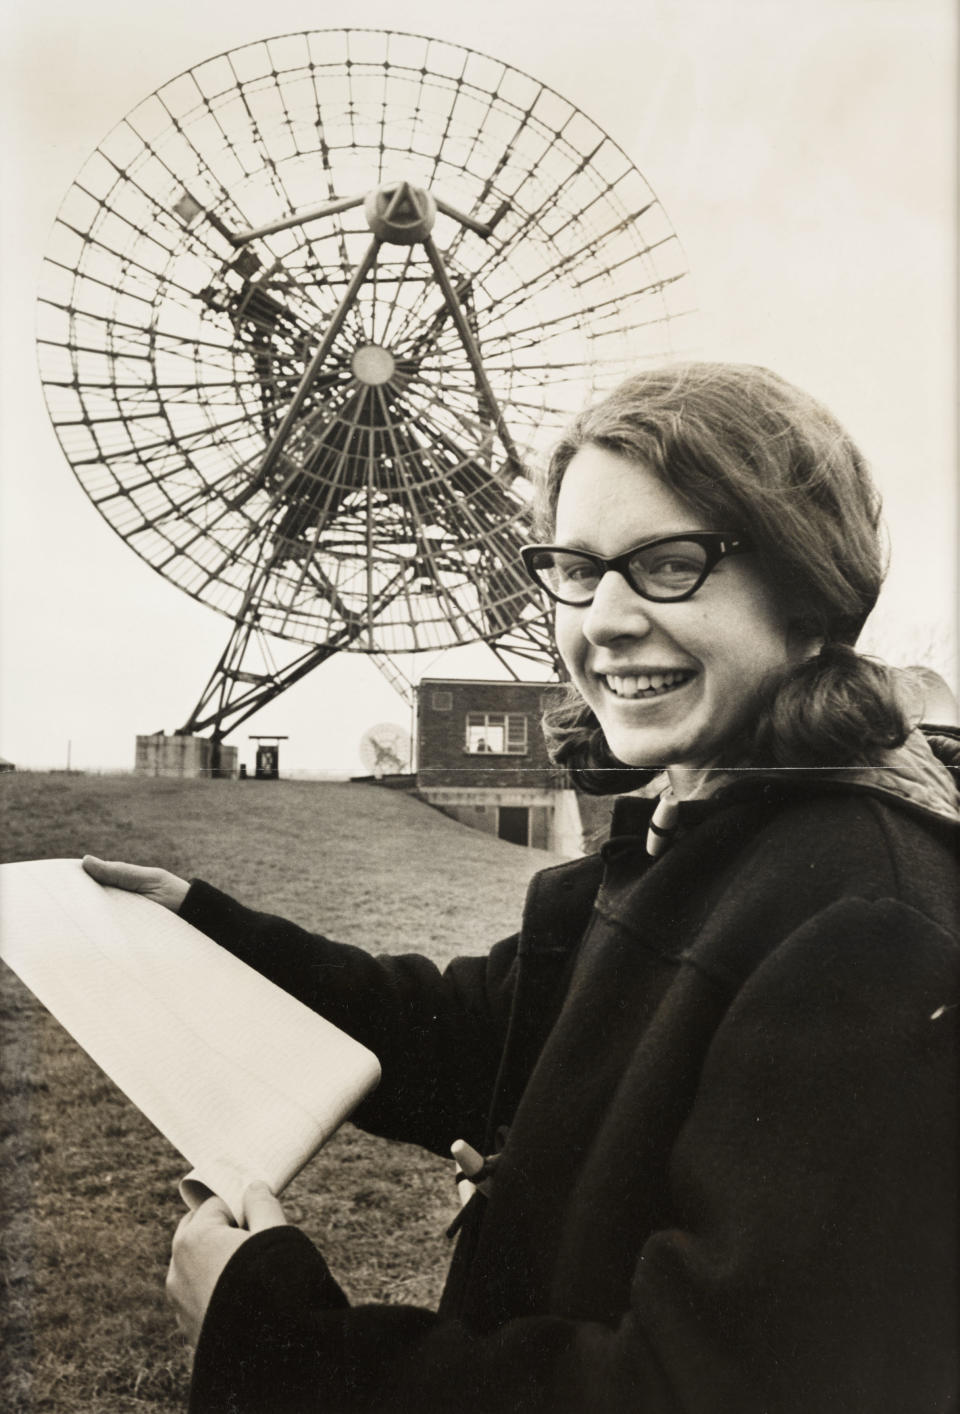 As a graduate student at the University of Cambridge, Jocelyn Bell Burnell helped Anthony Hewish and Martin Ryle construct a radio telescope to monitor quasars (a massive and extremely remote celestial object). It was Burnell&rsquo;s job to analyze the data from it. <br /><br /><a href="http://www.biography.com/people/jocelyn-bell-burnell-9206018#synopsis" target="_blank">According to Biography.com</a>:&nbsp;&ldquo;After spending endless hours poring over the charts, she noticed some anomalies that didn&rsquo;t fit with the patterns produced by quasars and called them to Hewish&rsquo;s attention... Over the ensuing months, the team systematically eliminated all possible sources of the radio pulses &mdash; which they affectionately labeled Little Green Men, in reference to their potentially artificial origins &mdash; until they were able to deduce that they were made by neutron stars, fast-spinning collapsed stars too small to form black holes.&rdquo;&nbsp;<br /><br />In 1974, Hewish and Ryle received the Nobel Prize for Physics for the discovery.